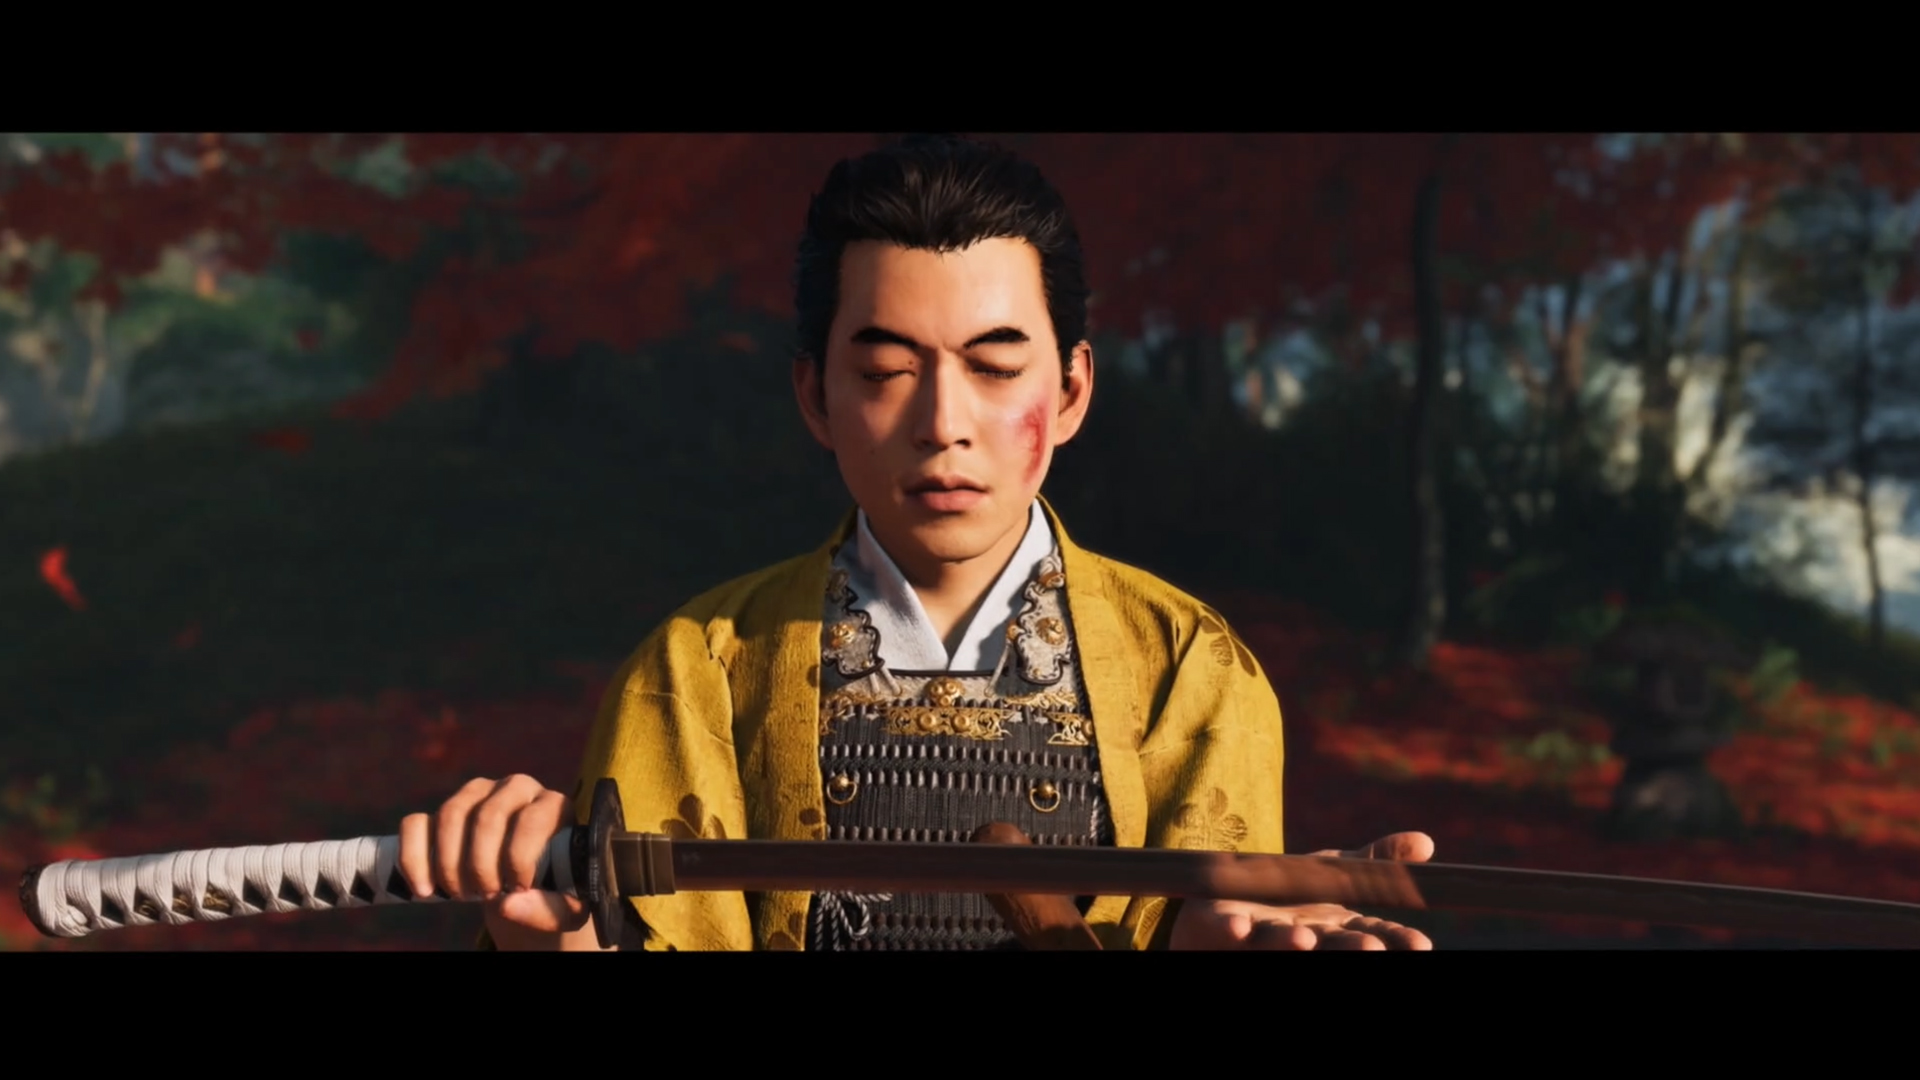 Ghost of Tsushima Multiplayer: Is There Online, Local, Split-screen & Co-op  with Friends? - GameRevolution